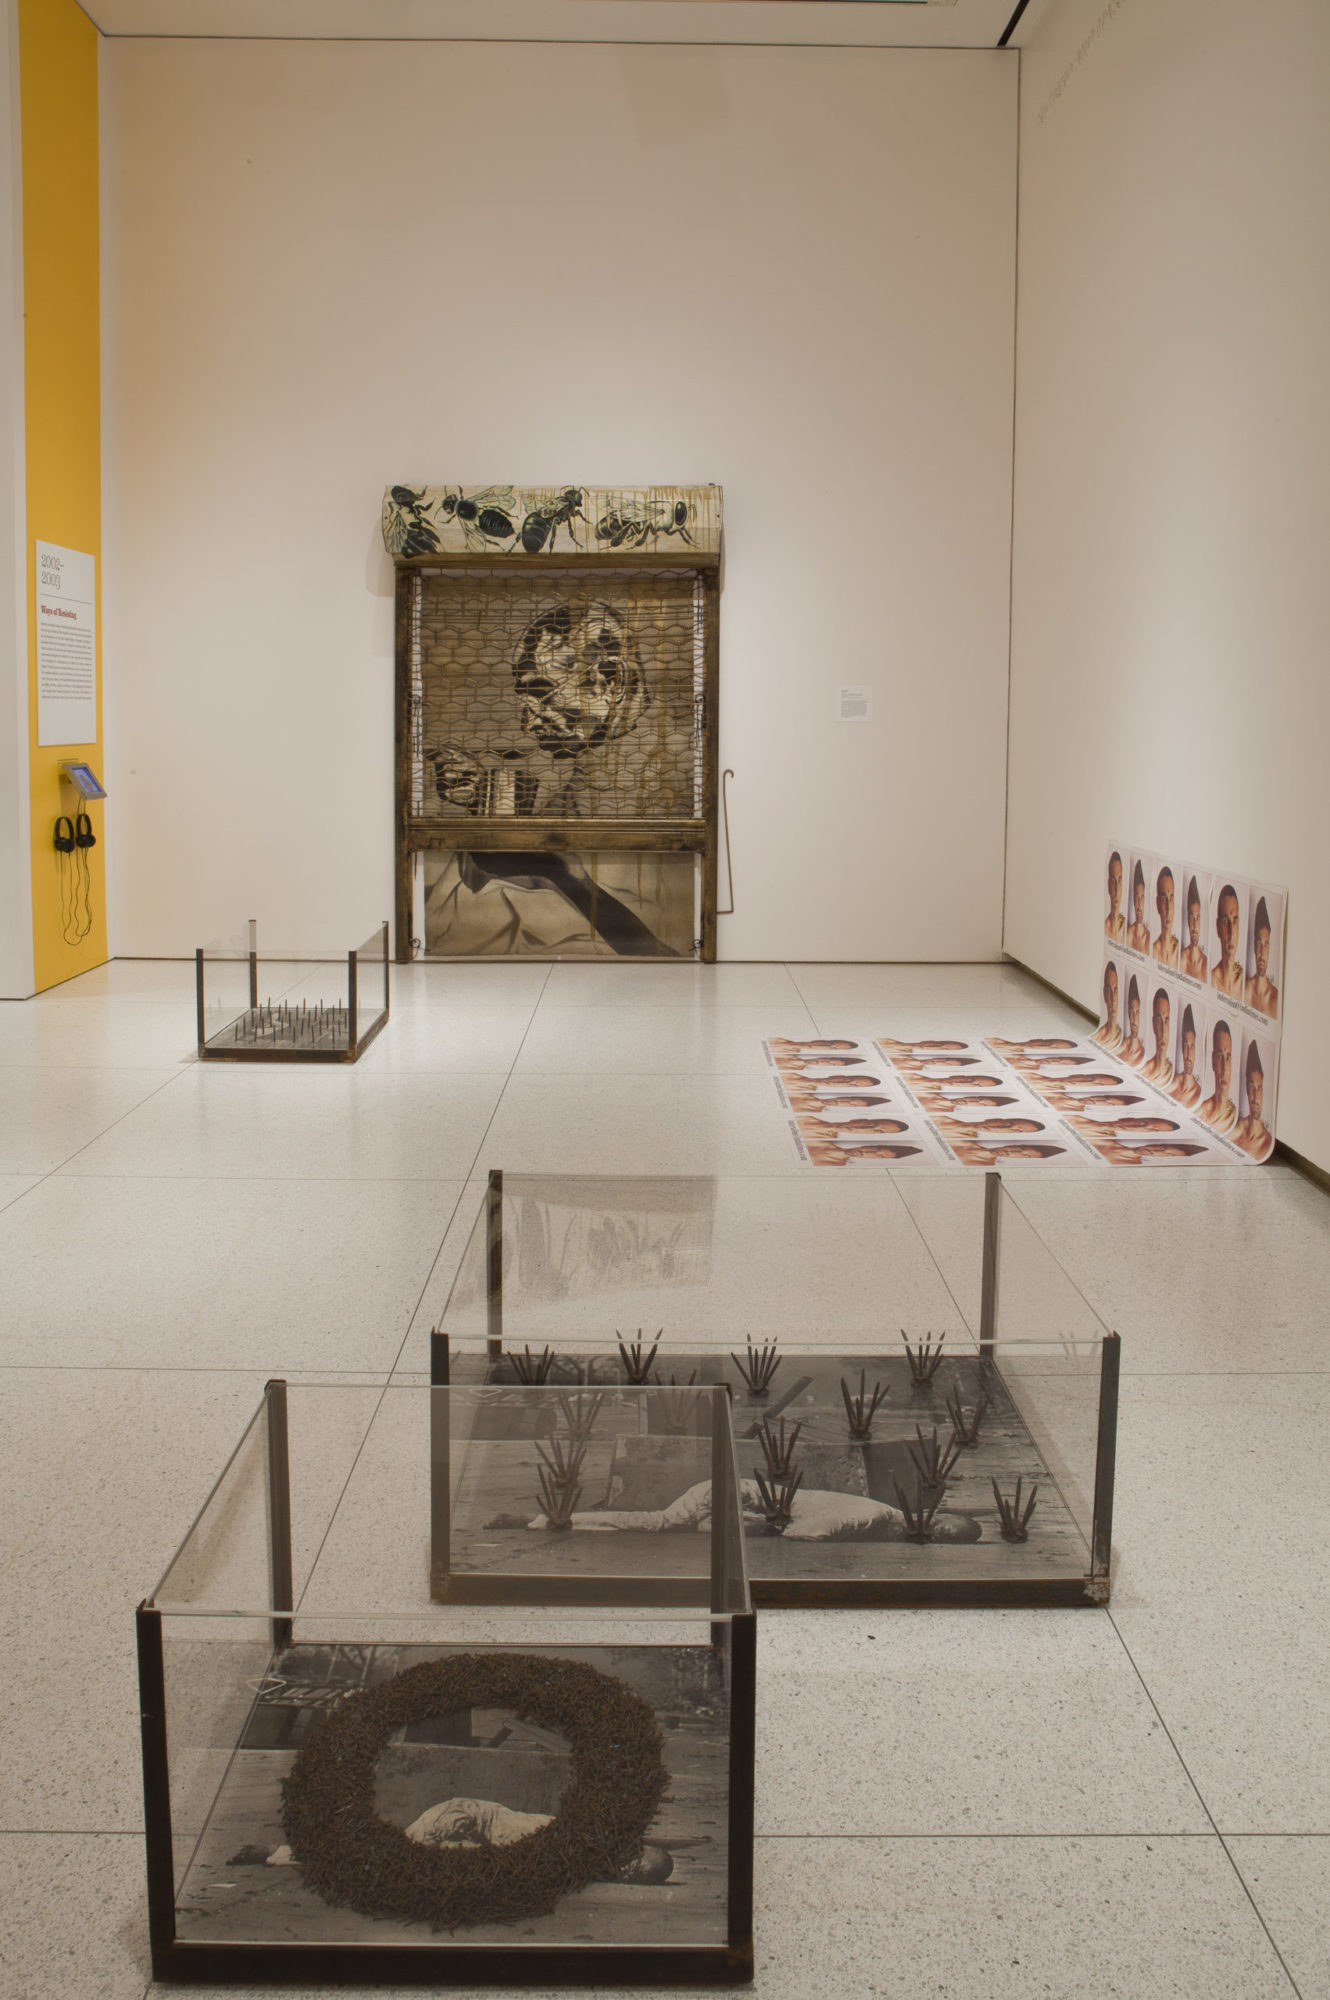 An open floor of a gallery room. On the front facing wall there is a back and white photgraph of an older man's left profile. In front of this picture is a sculpture of crosshatched vitrine of glass and iron. On the floor to the right of this, there's a single poster half slouching on the floor, which shows a series of headshots of someone in front of a white background. On the floor in front of the center picture, there are three glass tanks containing the same photograph of a man laying on the ground. Each copy is covered in arranged nails.